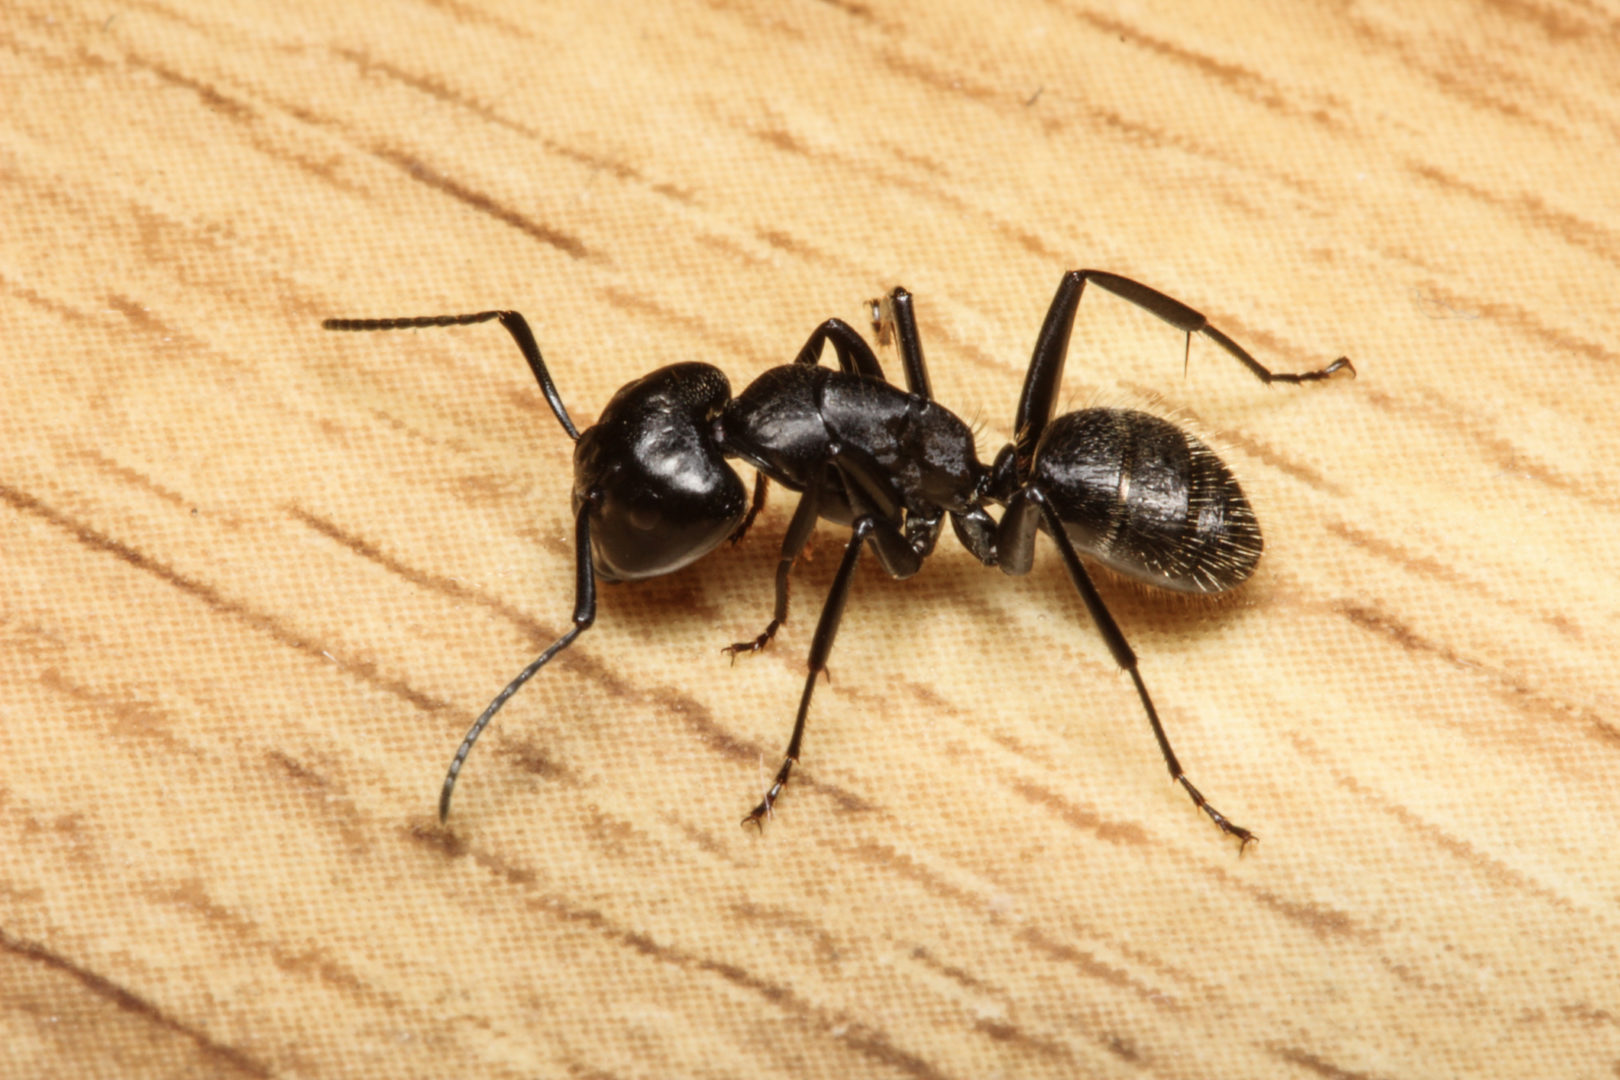 Ants removal services in kitchener,guelph,waterloo,brantford,cambridge